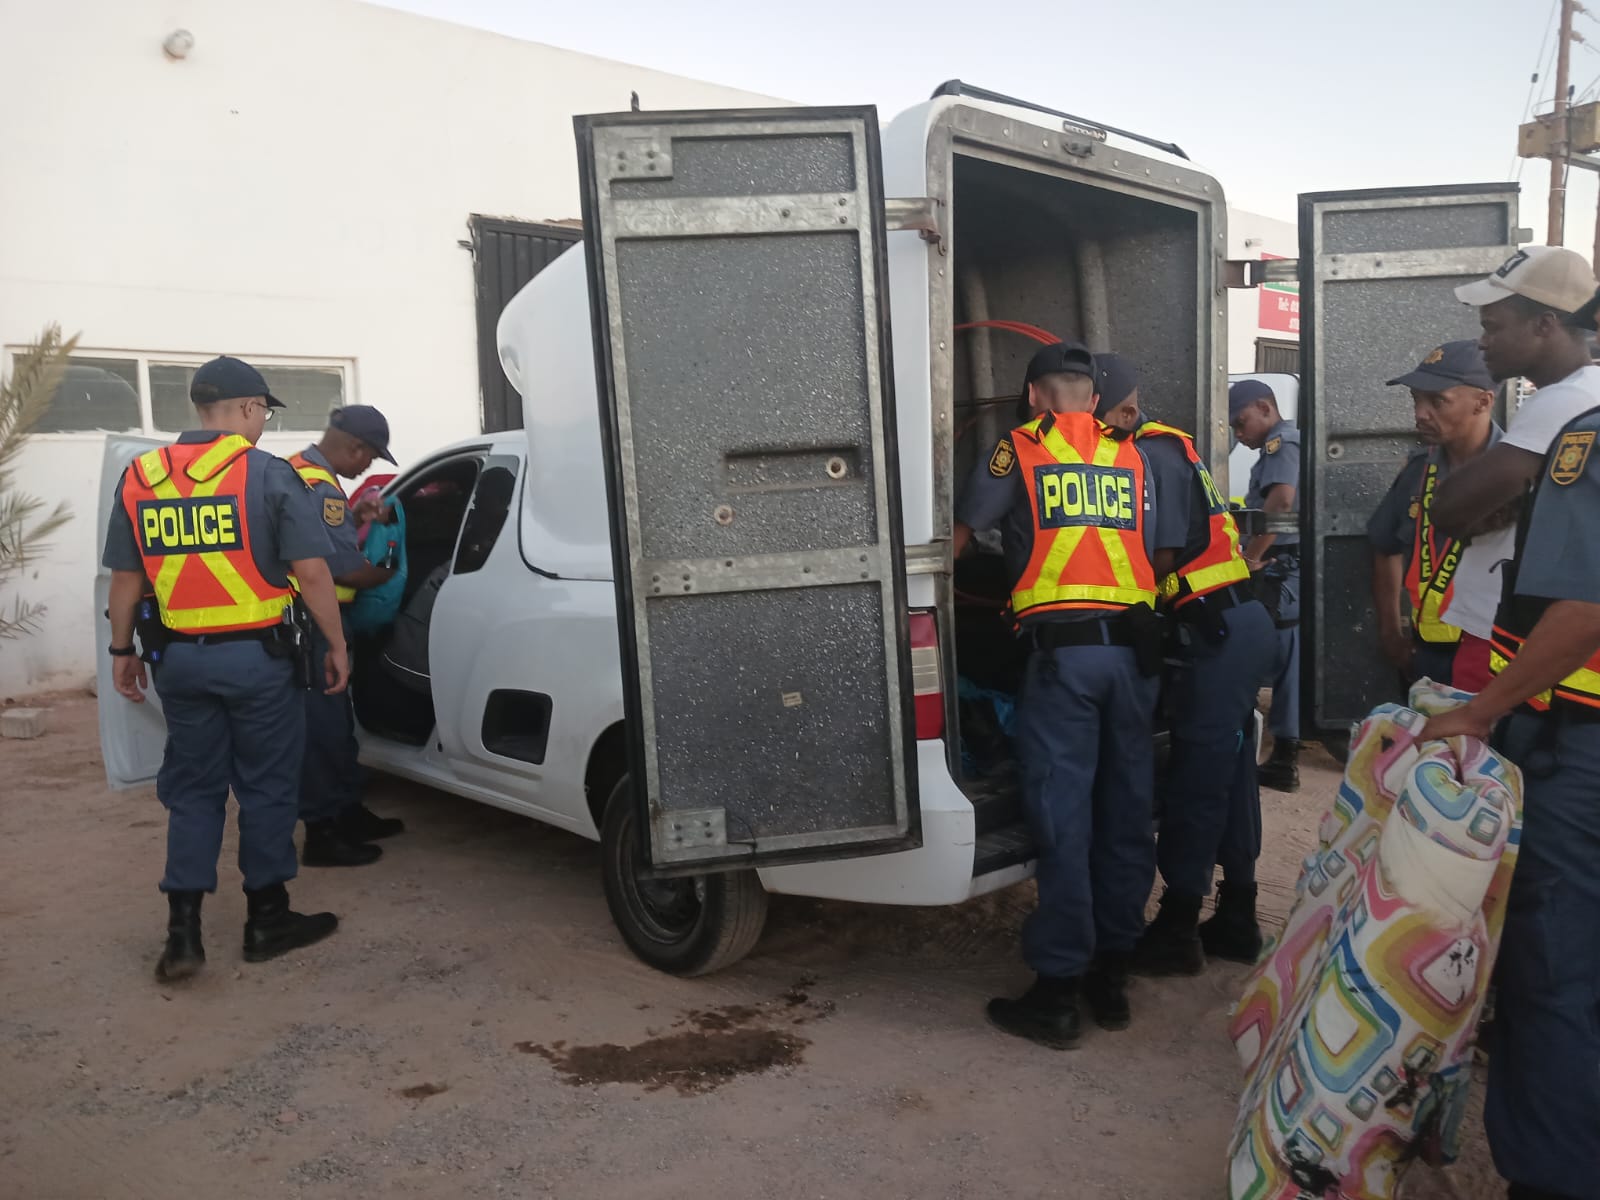 Operation Shanela squeezing the space for criminals to operate